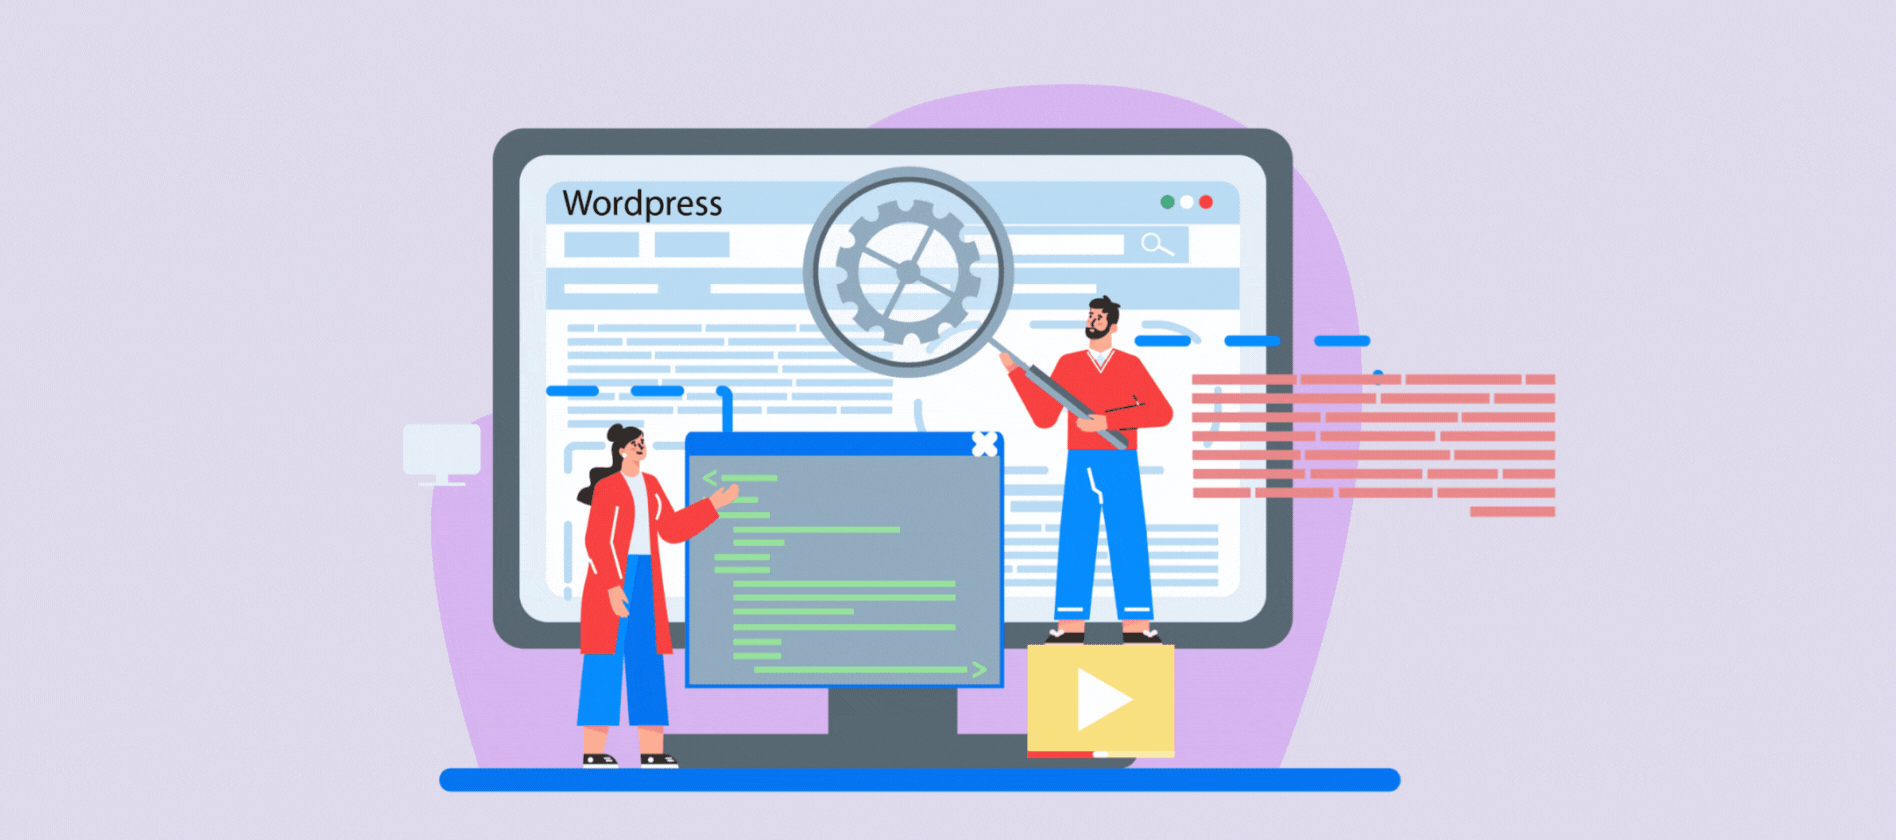 Why should you go with WordPress Development over others